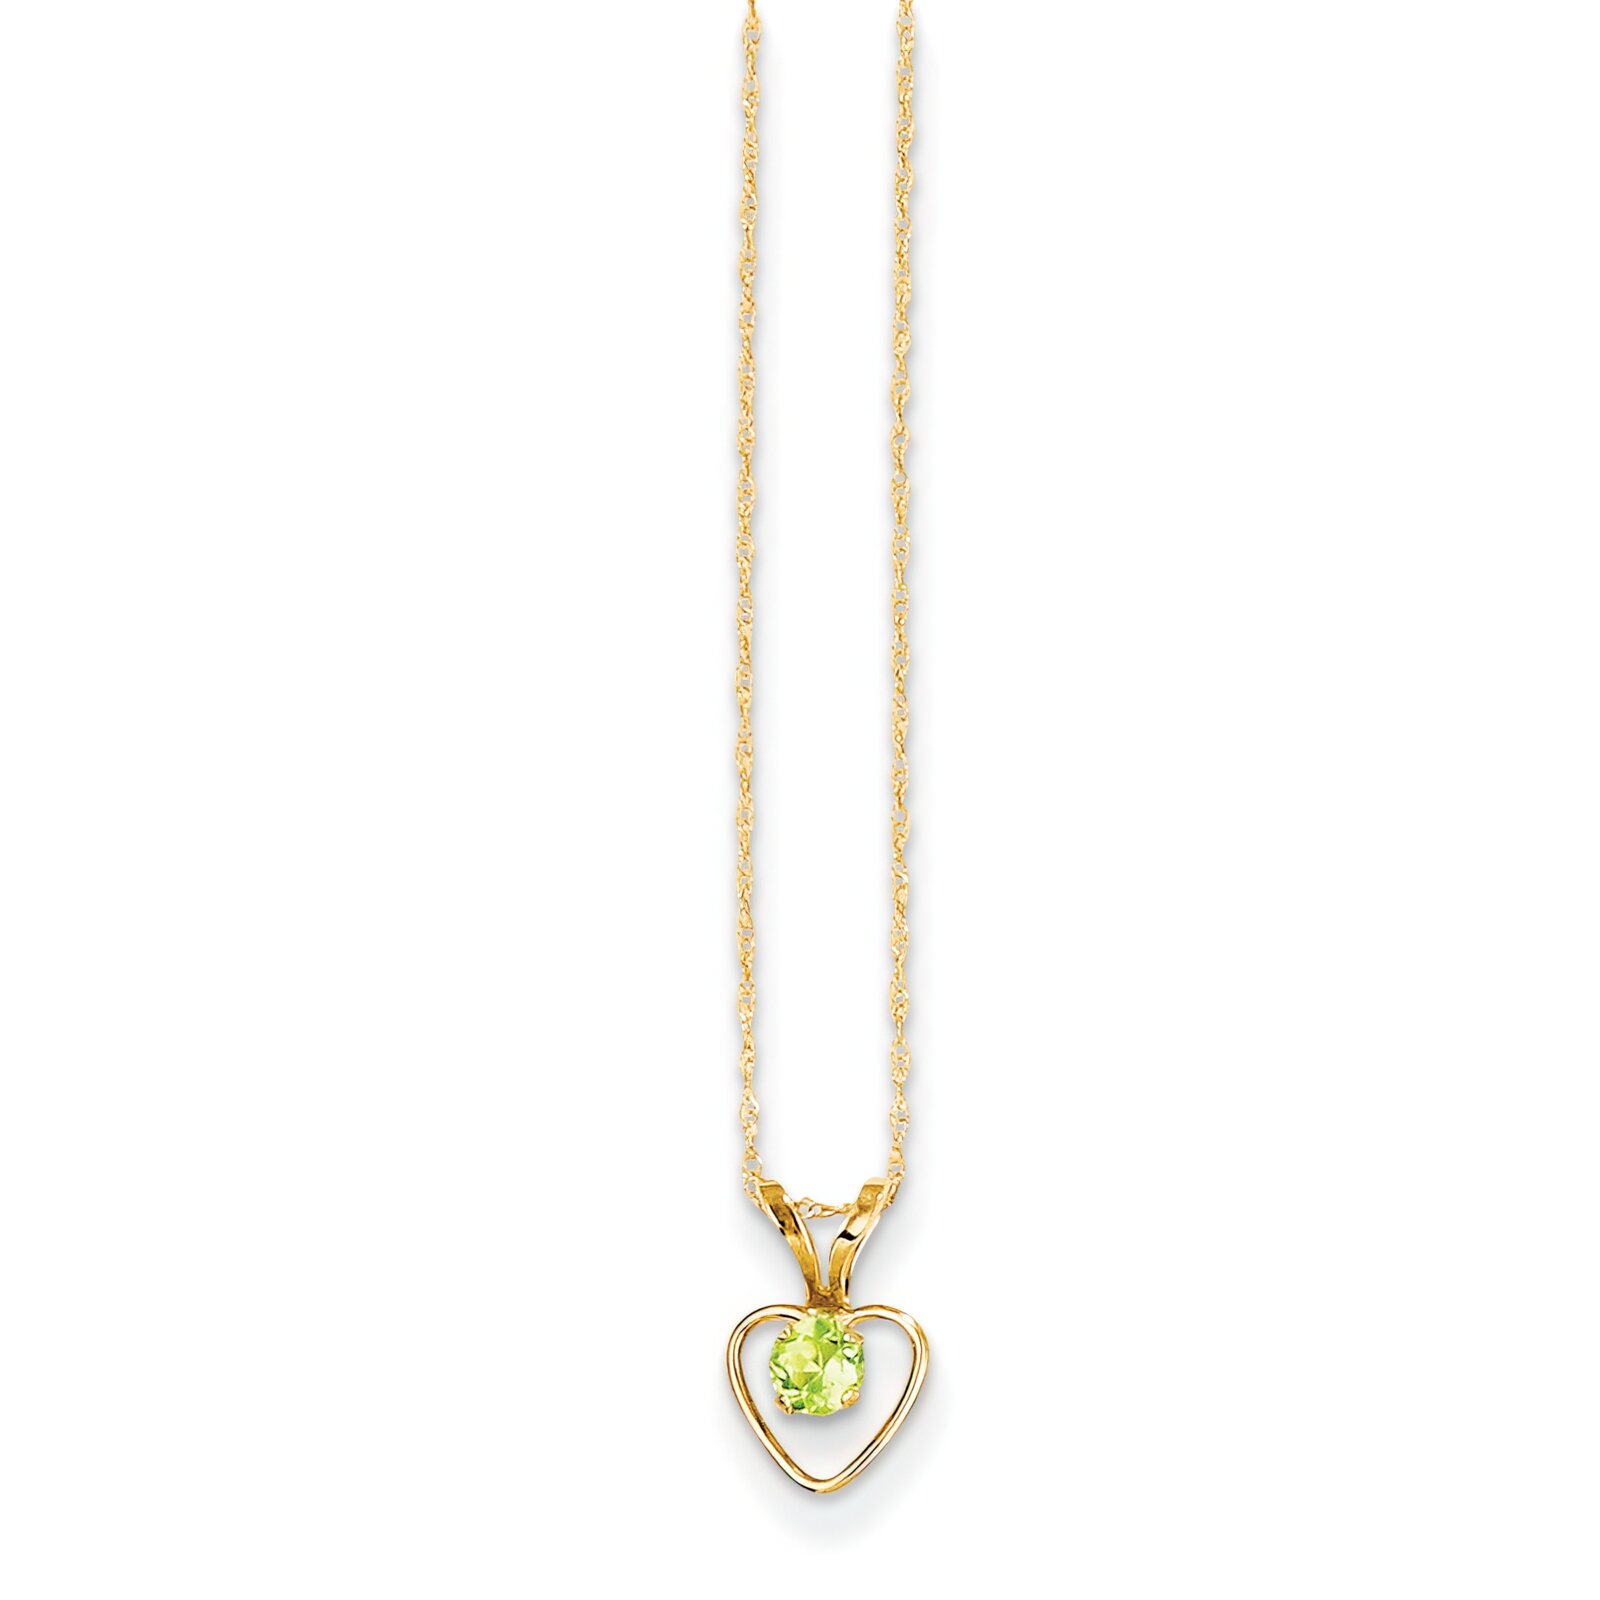 Findingking 14K Gold Peridot Heart Childrens Birthstone Necklace